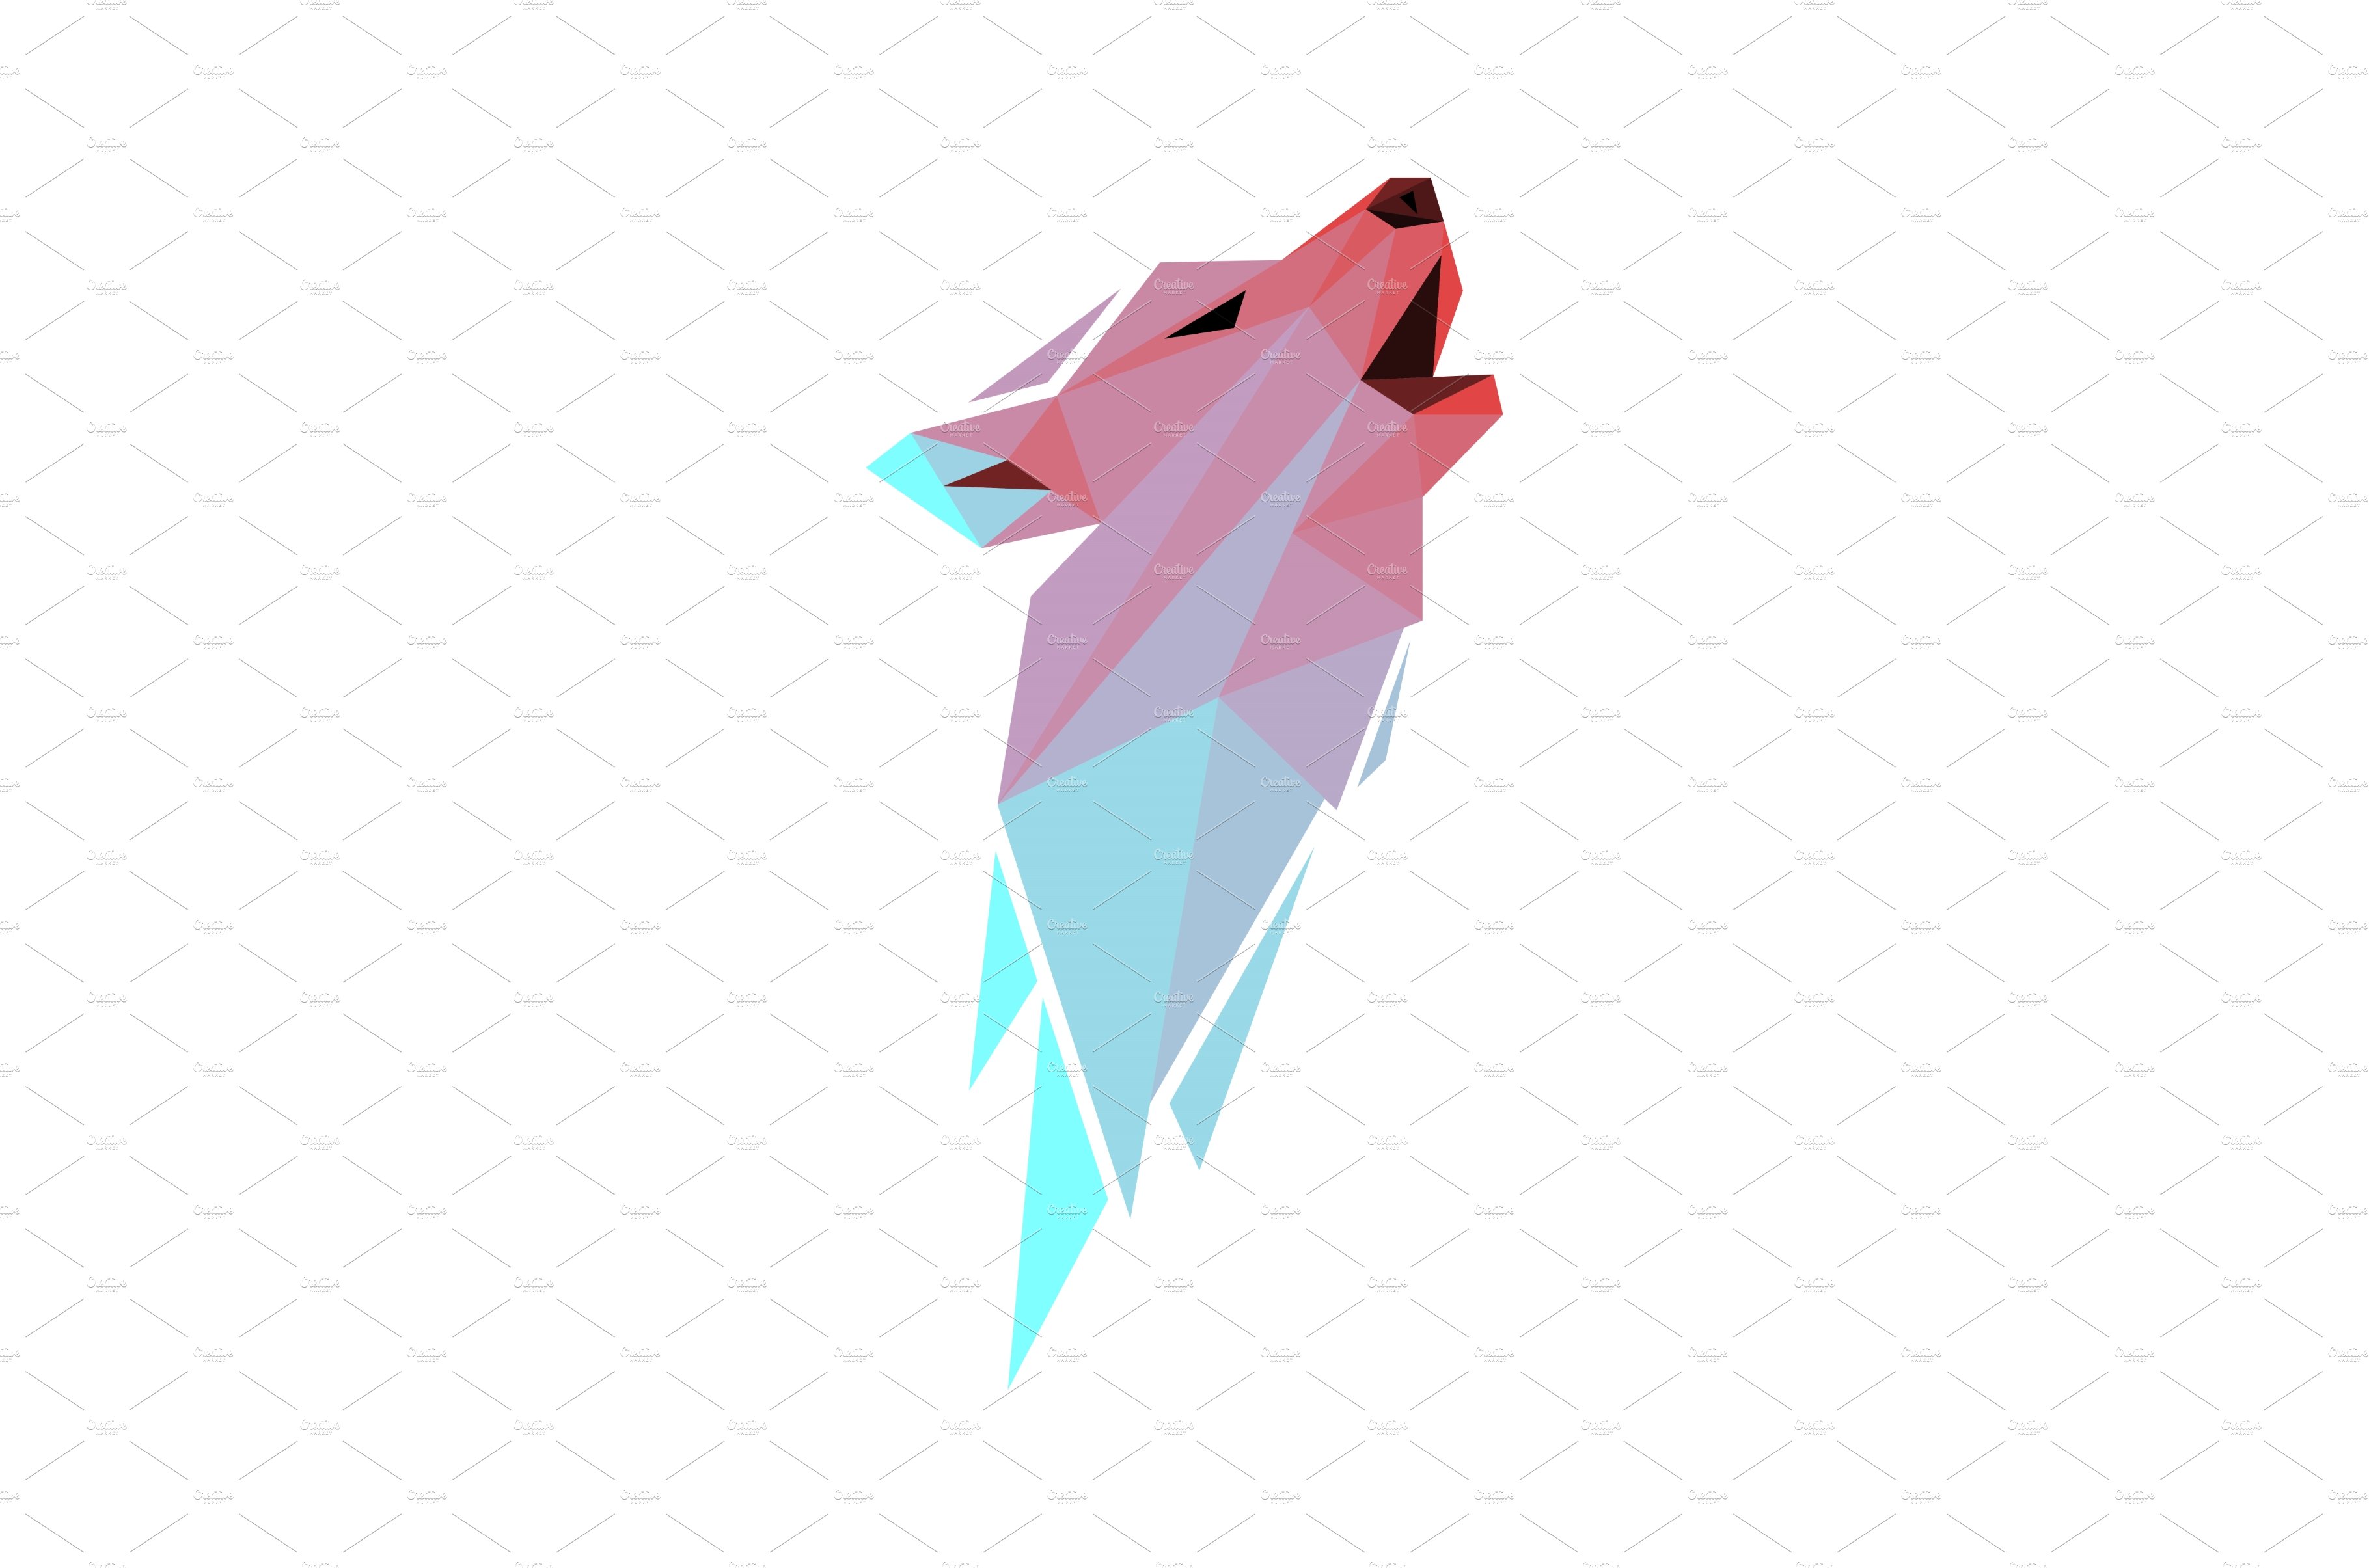 Wolf in paper art style cover image.